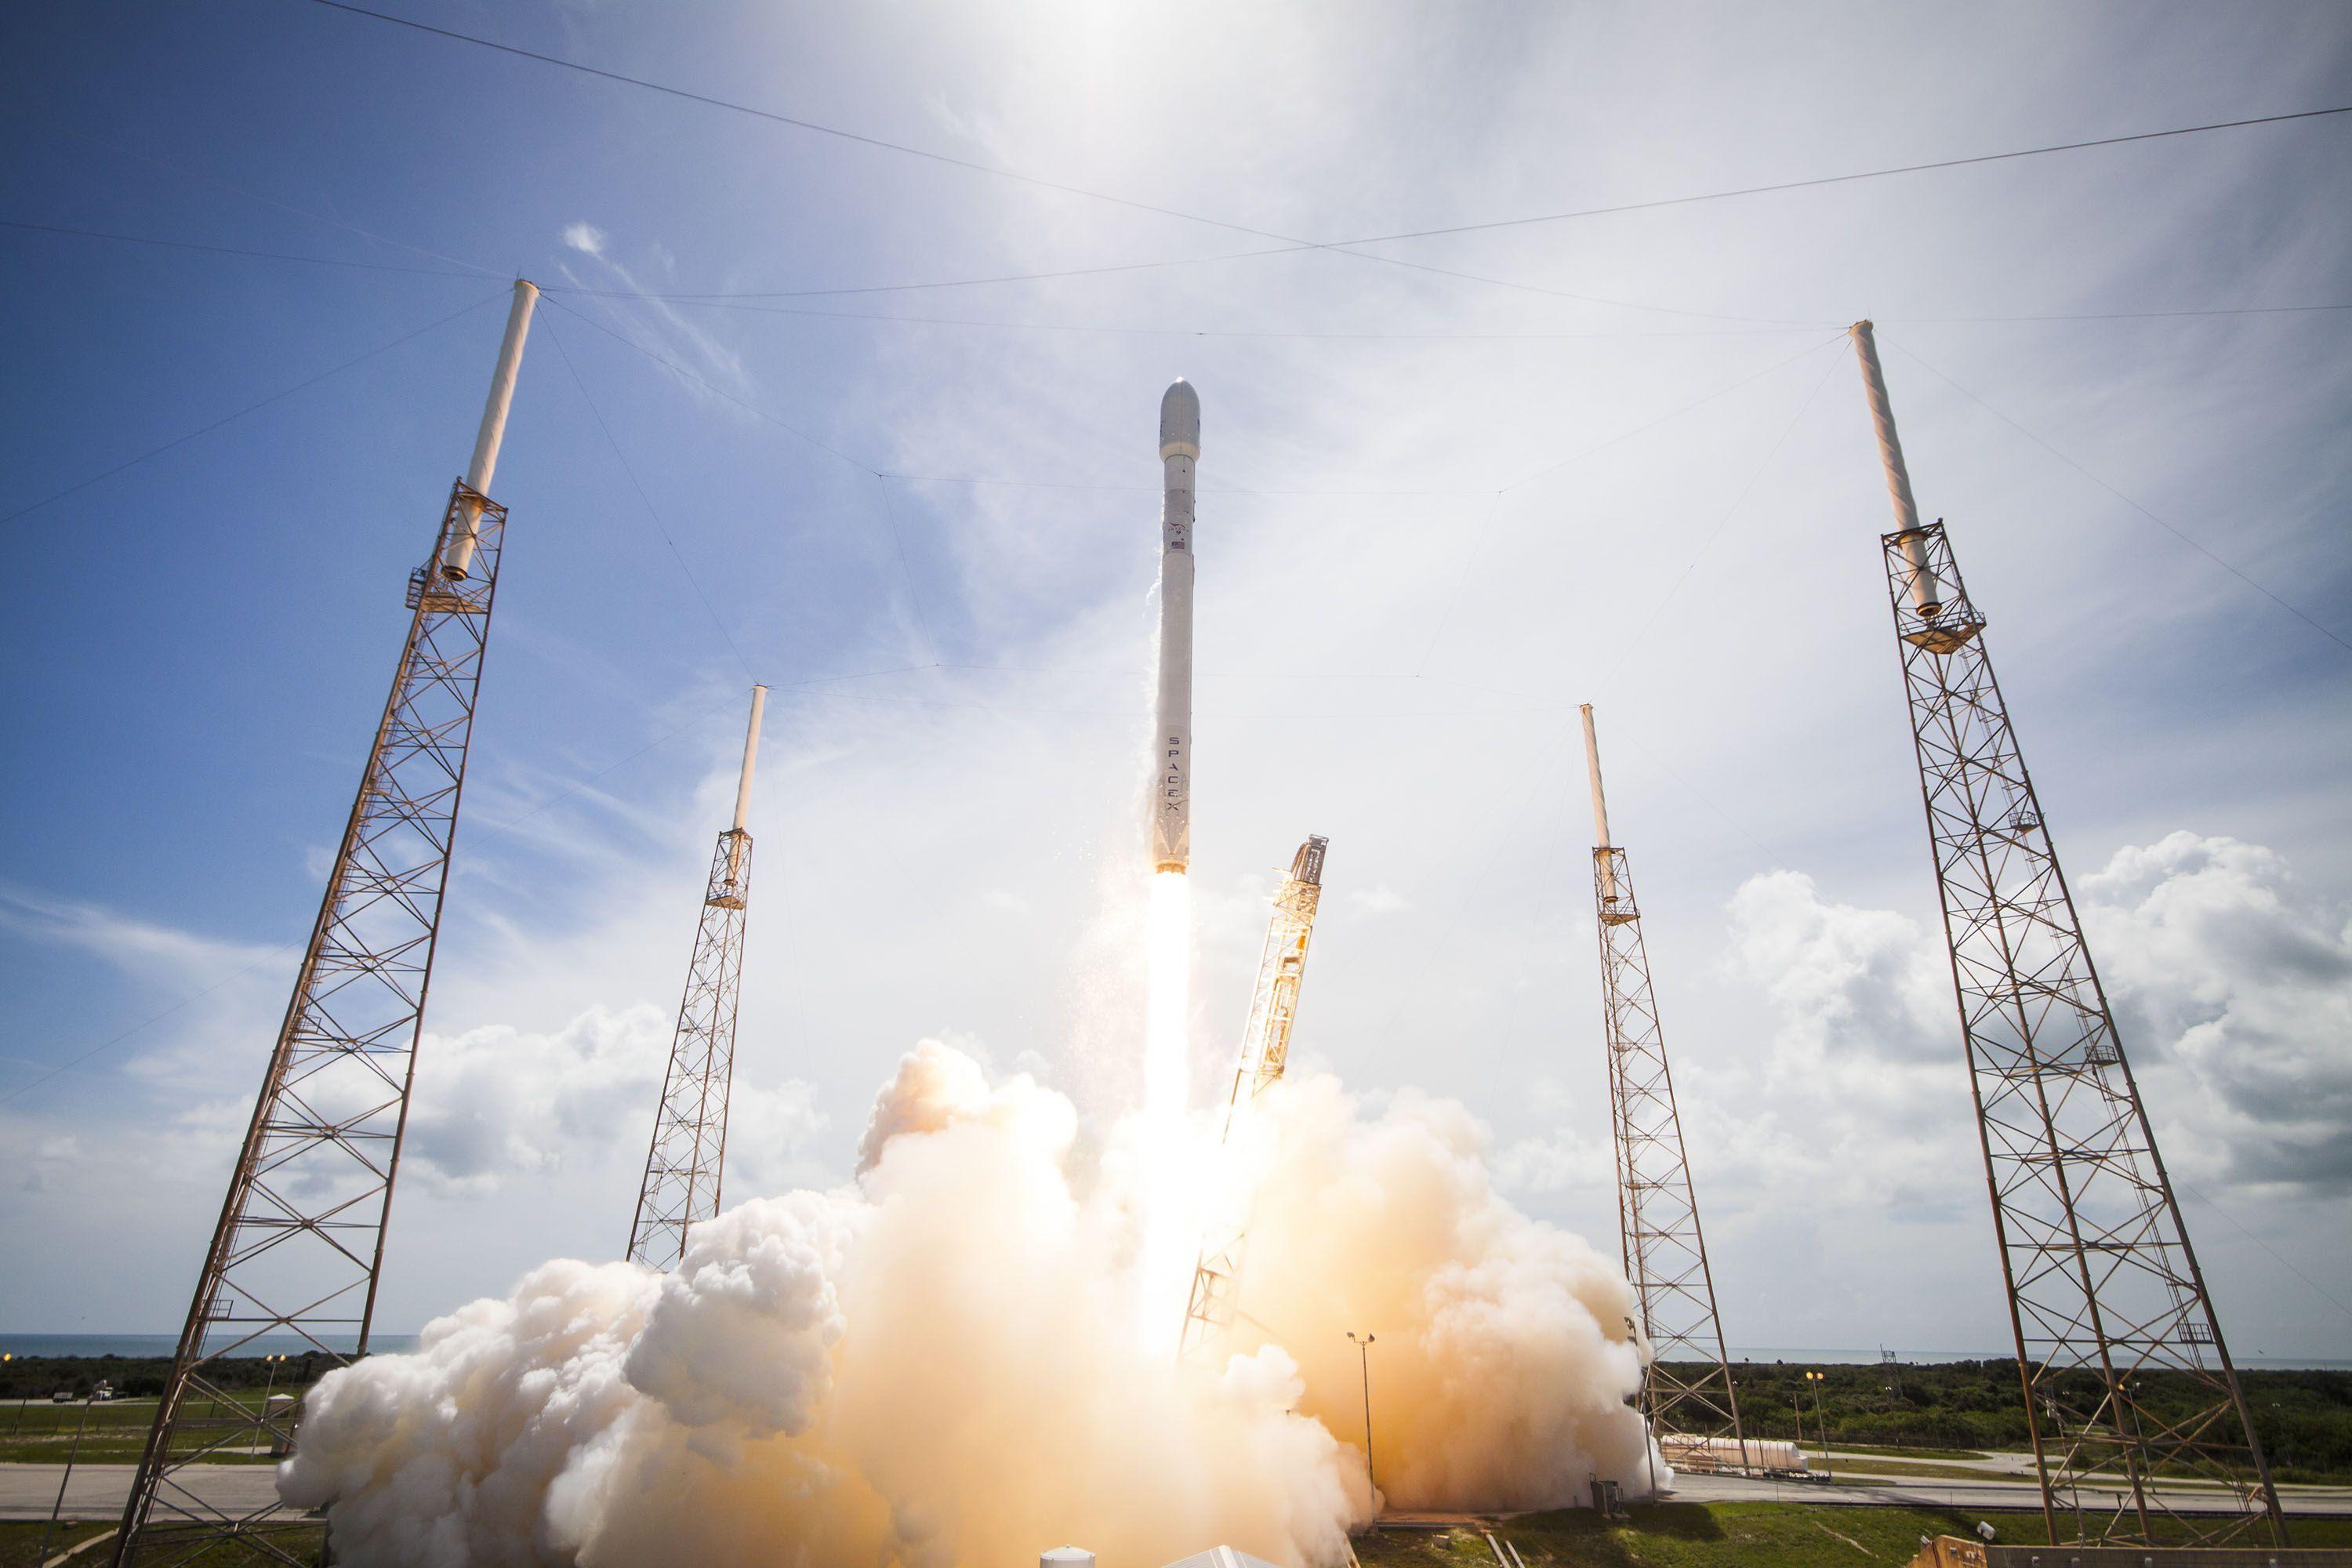 How to Watch SpaceX's Falcon 9 Launch Tuesday